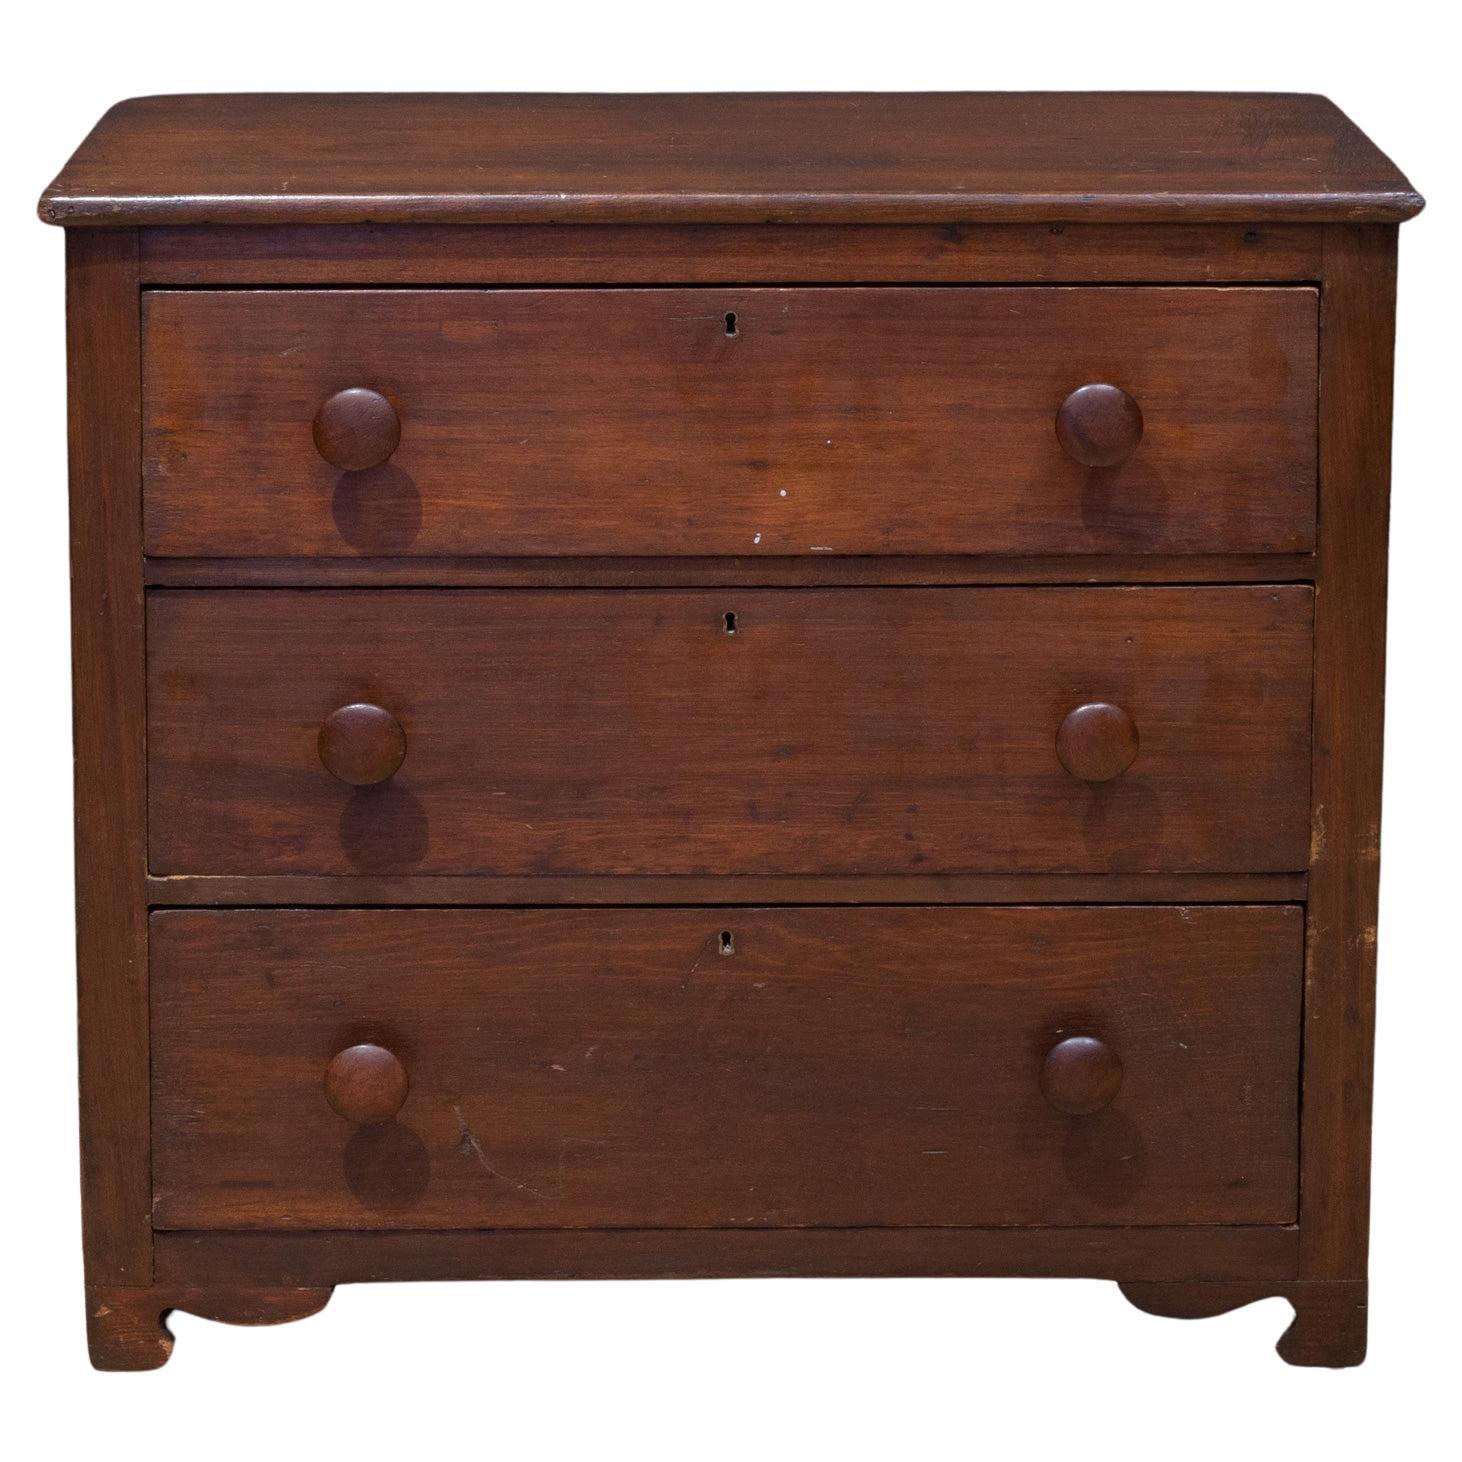 ABOUT

A 19th century Mahogany three drawer chest of drawers constructed with dovetail joints. Each drawer has a two large round knobs and brass key holes. Panel back.

    CREATOR Unknown.
    DATE OF MANUFACTURE 19th century.
    MATERIALS AND